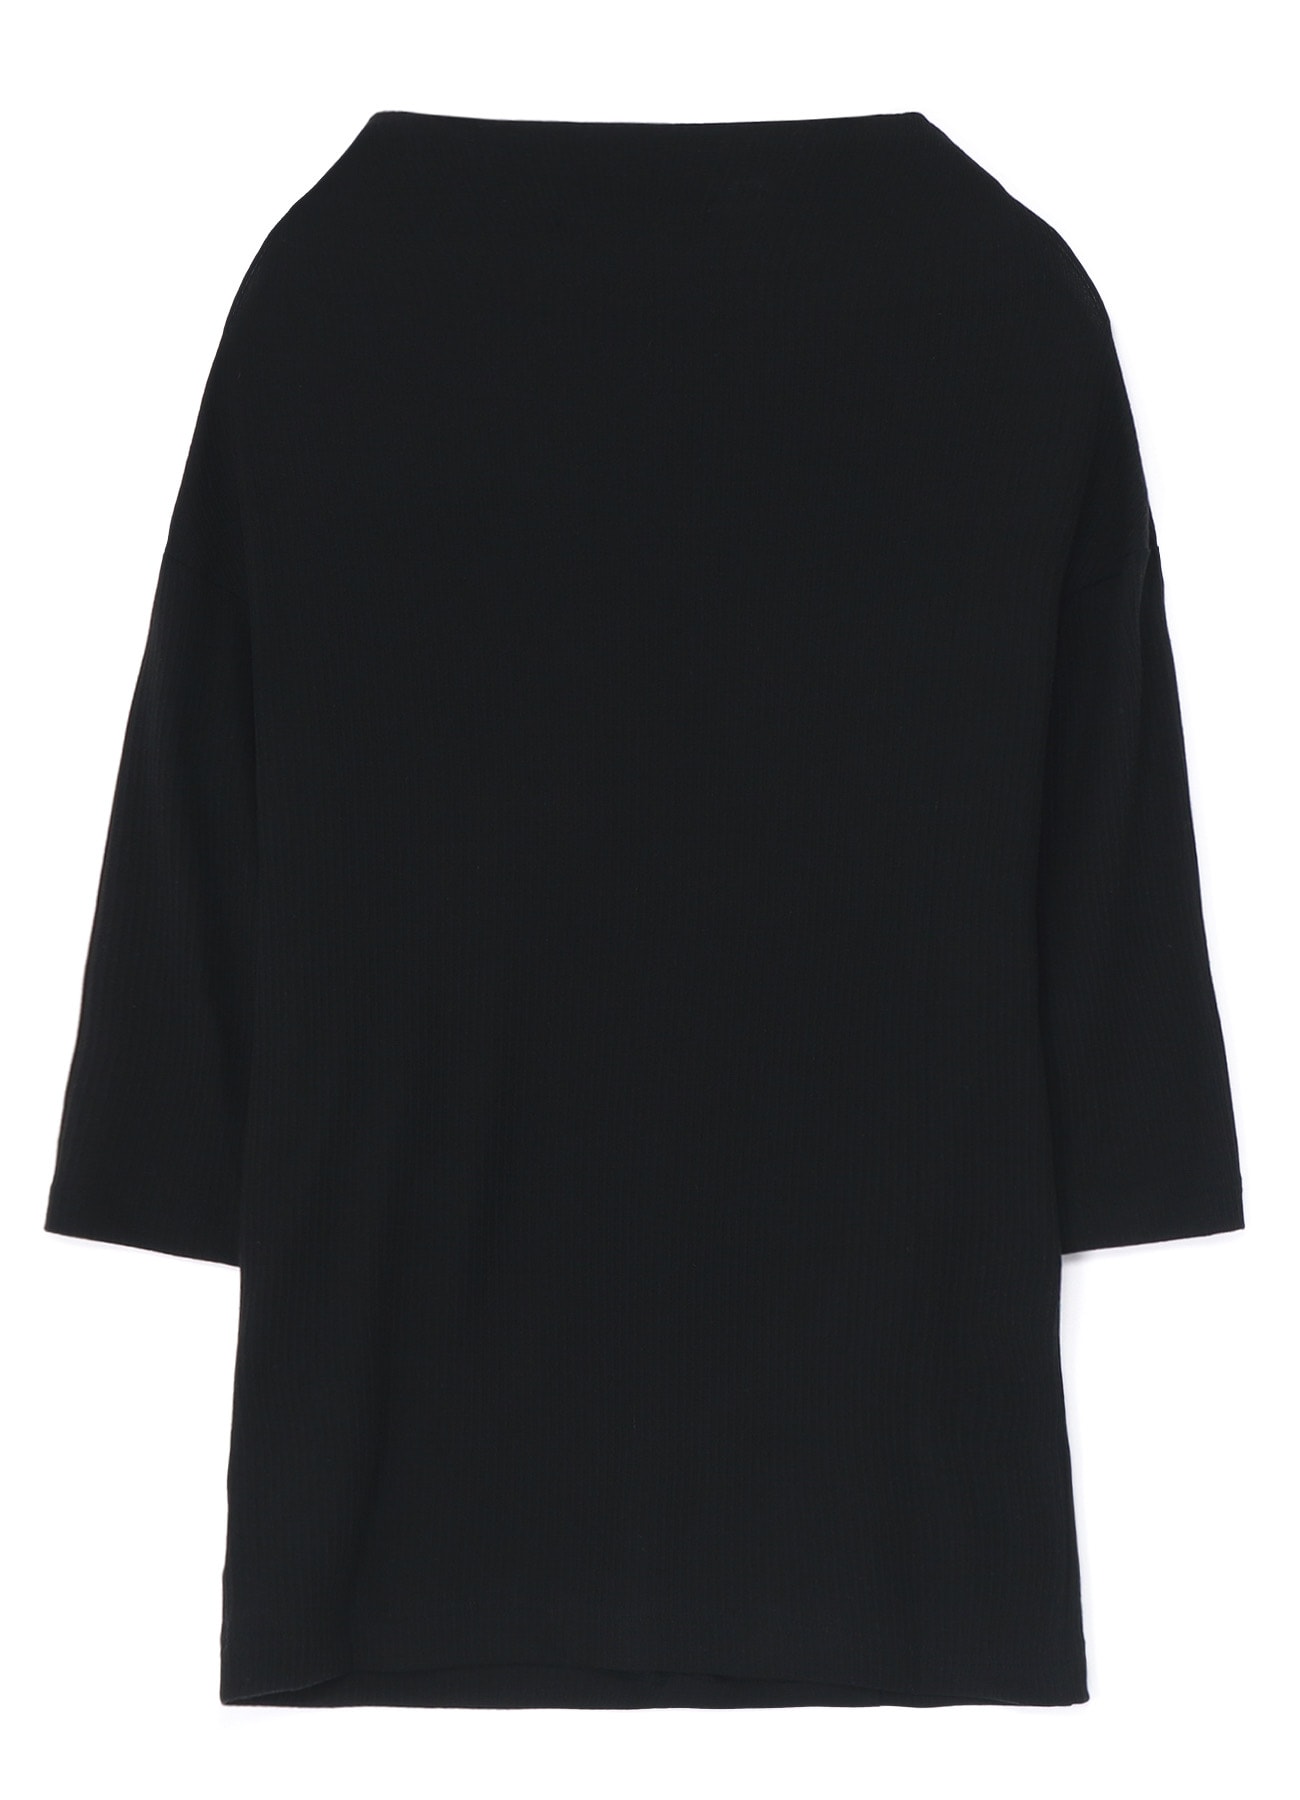 OFF NECK 3/4 SLEEVE RIB FLAPPED T-SHIRT(S Black): Y's｜THE SHOP 